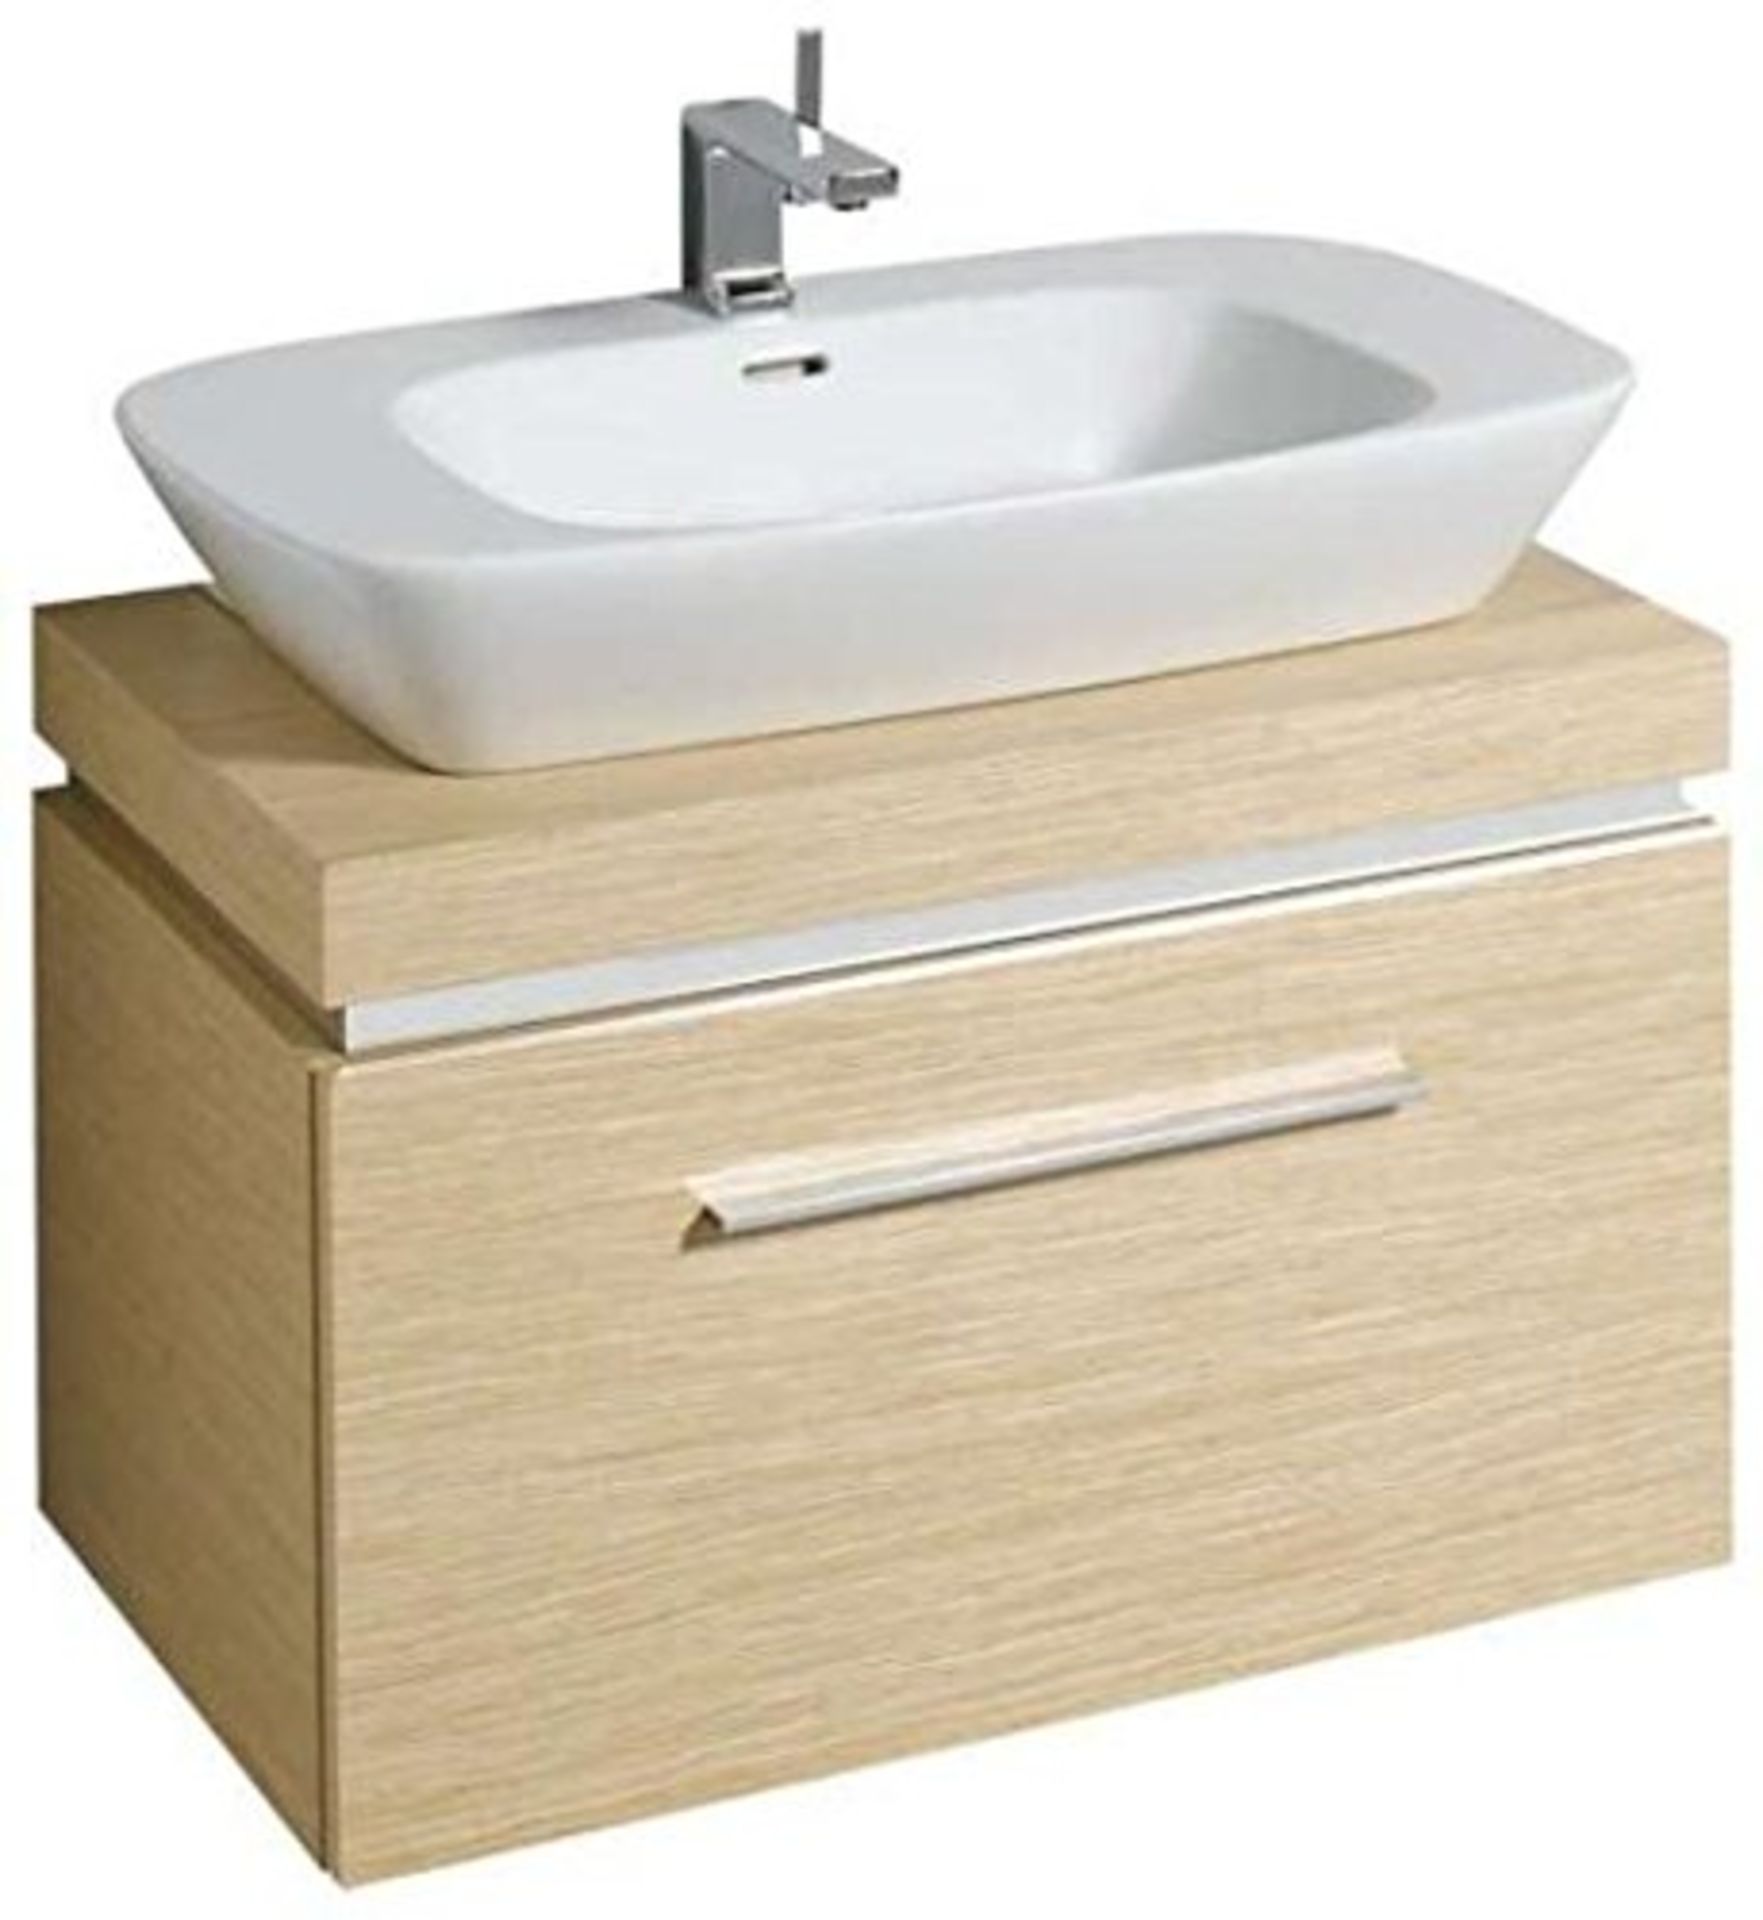 (HM2) Keramag 1000mm Silk Oak Vanity Unit with Drawer. RRP £919.99. Comes complete with basin.... - Bild 2 aus 2